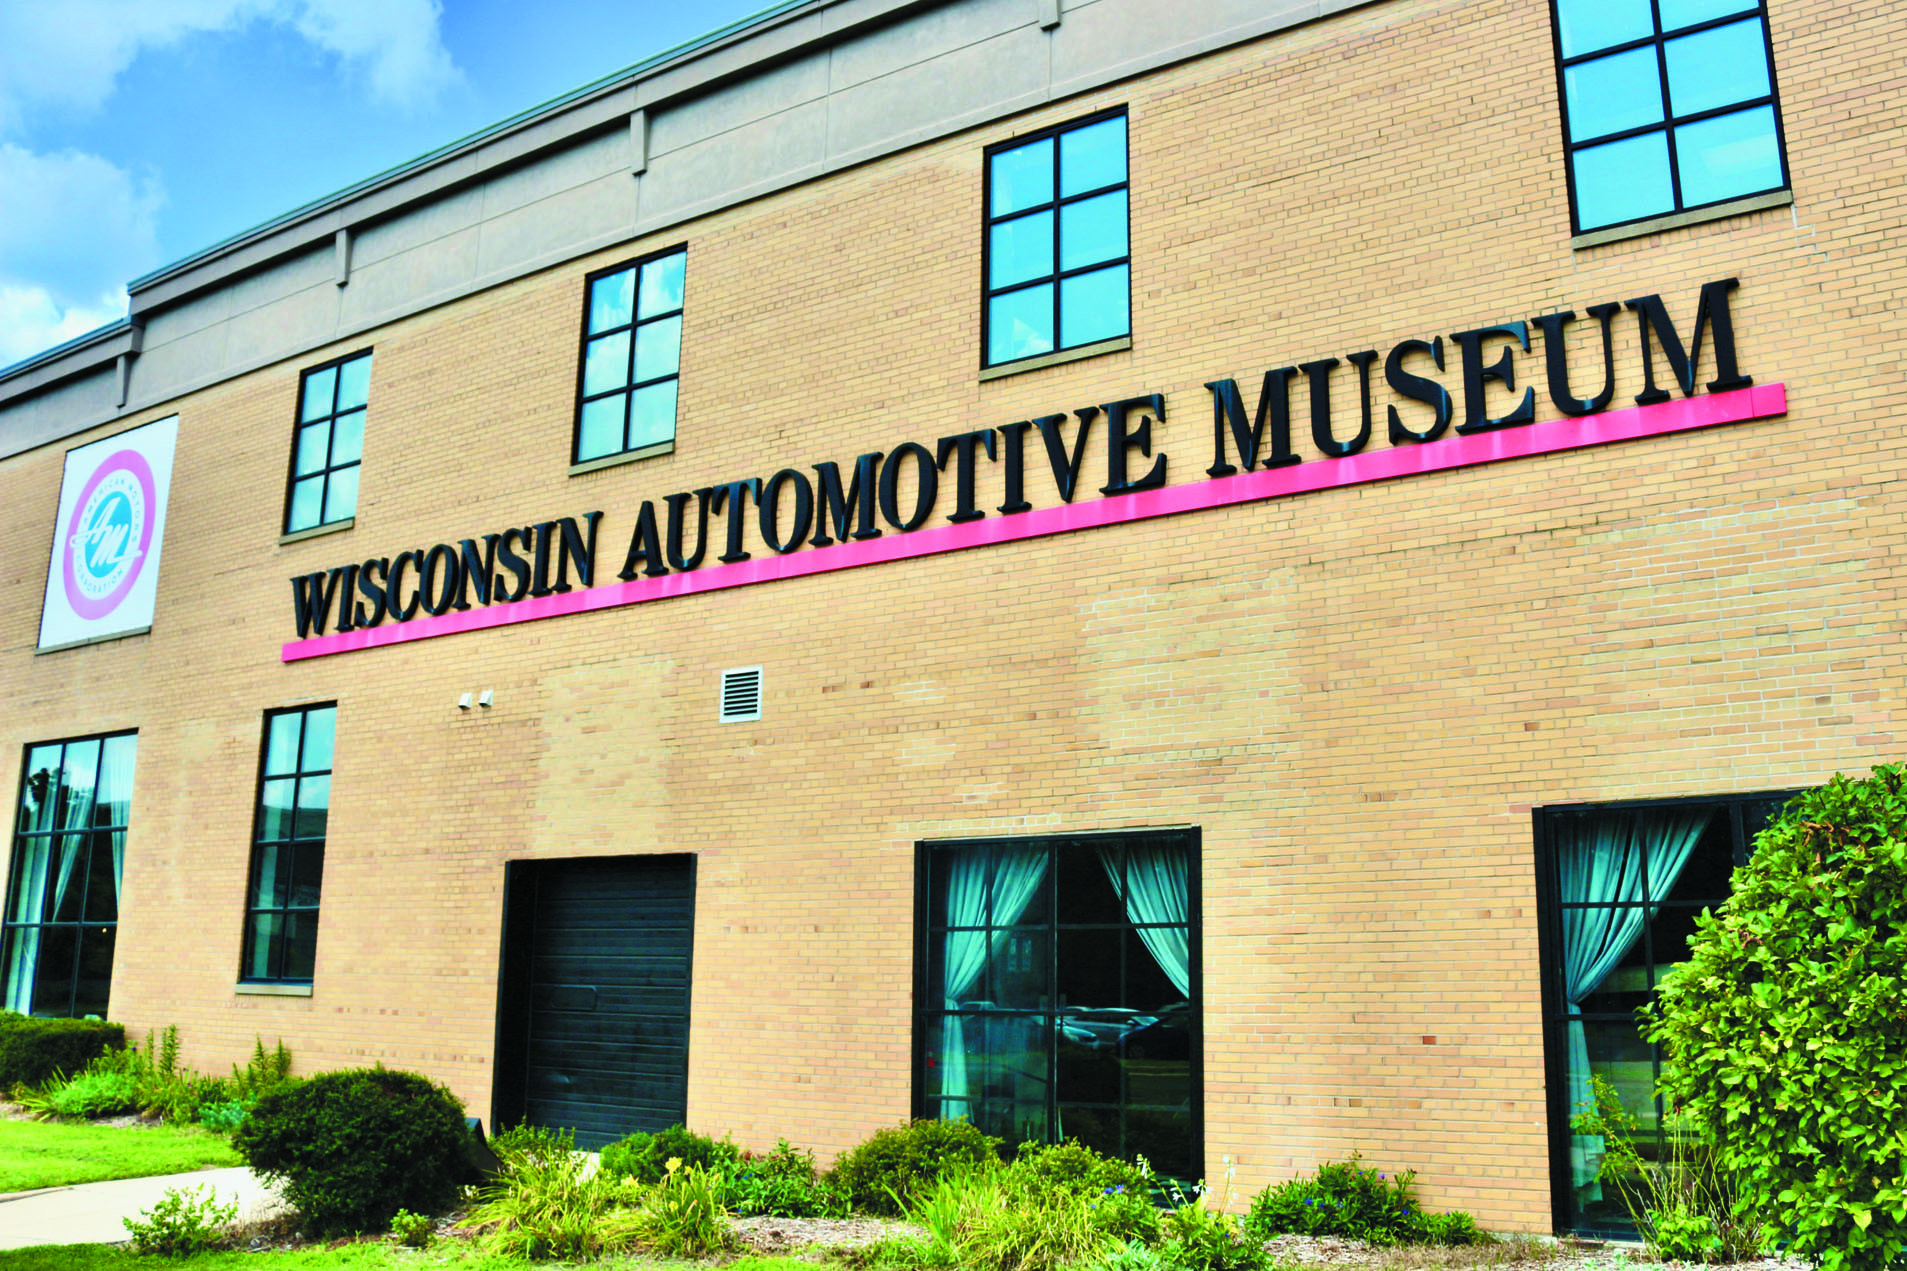 Visiting The Wisconsin Automotive Museum